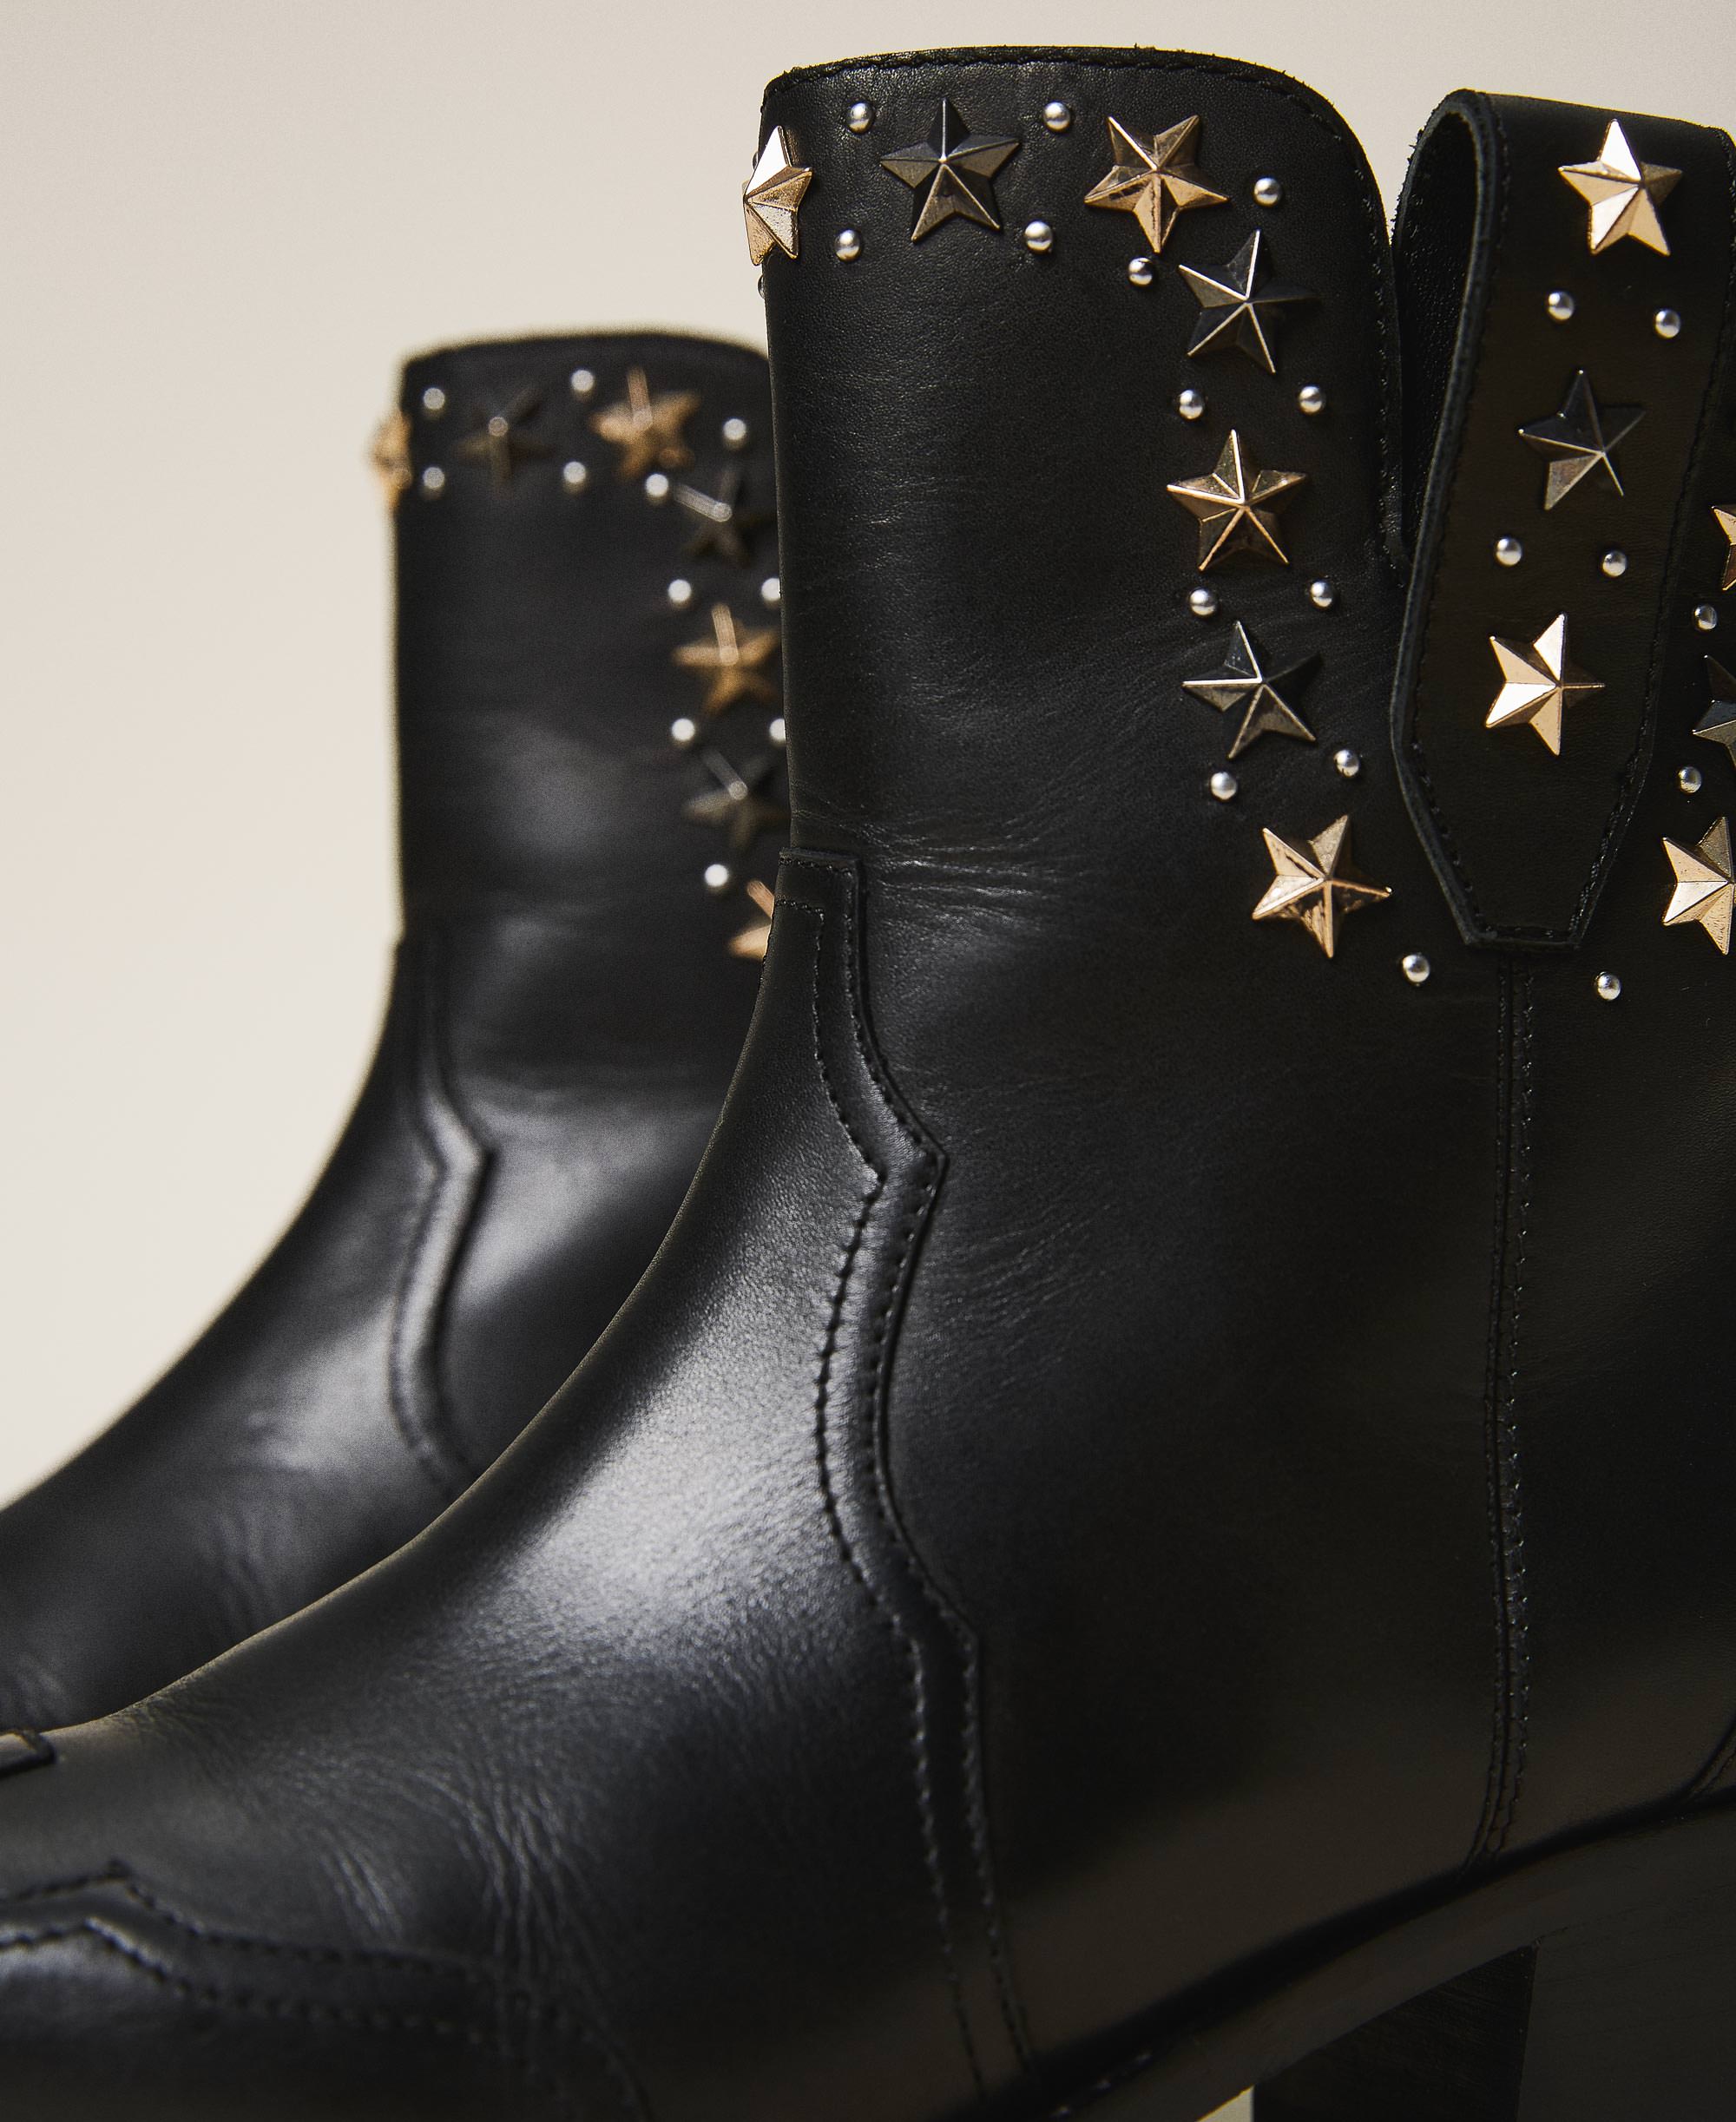 leather boots with studs